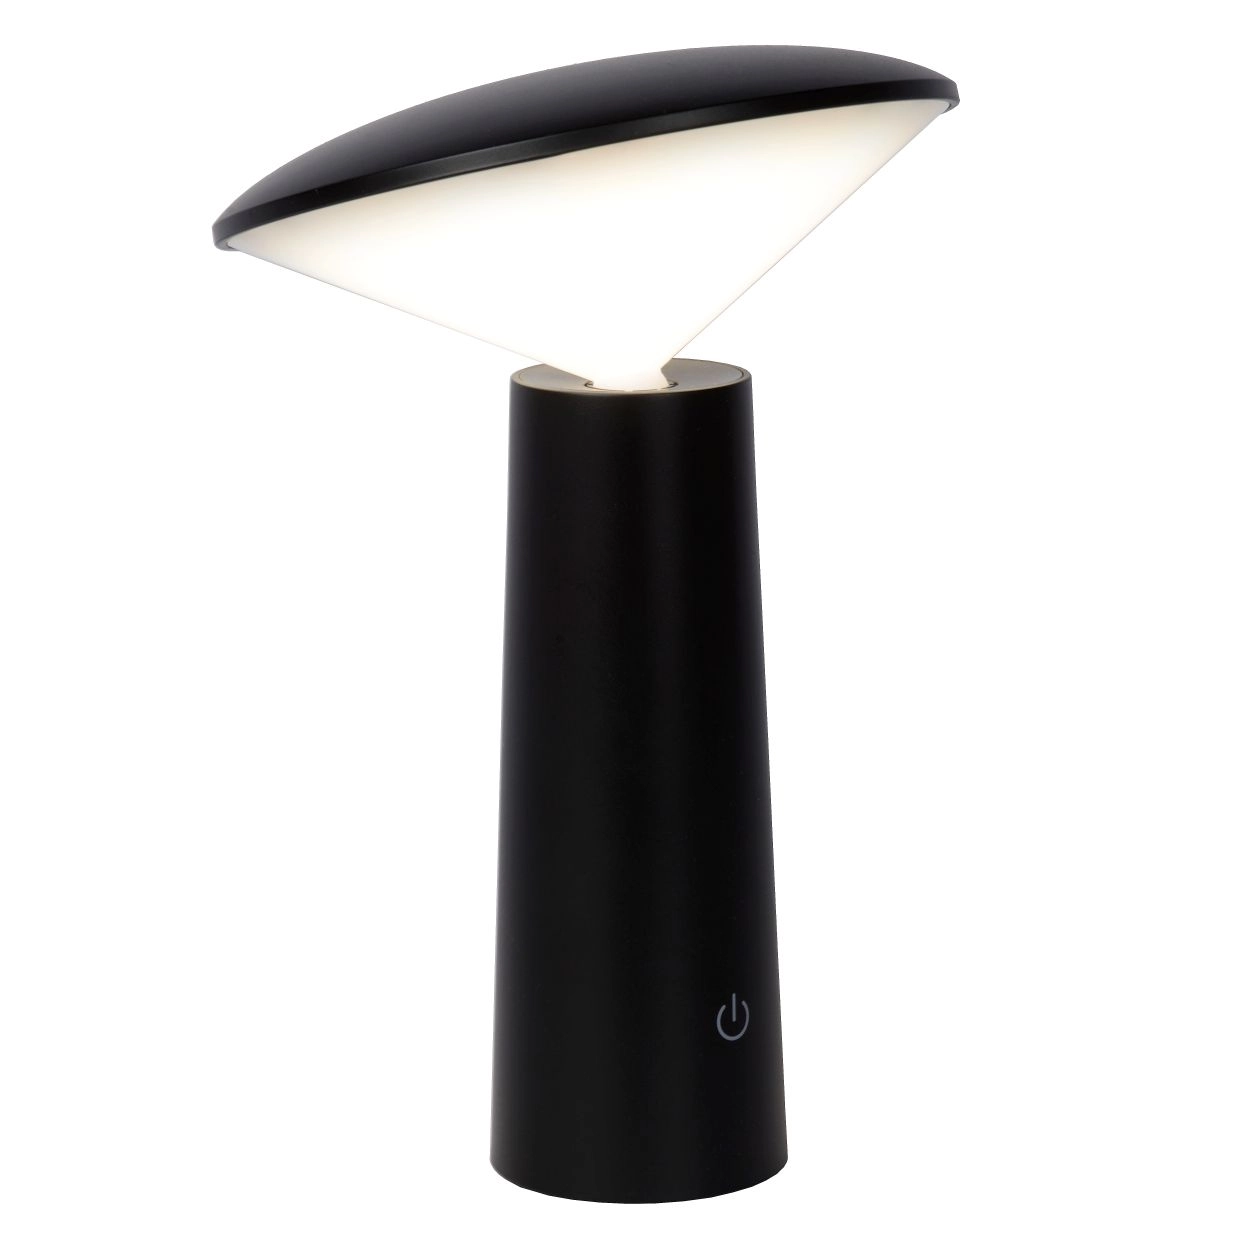 LU 02807/04/30 Lucide JIVE - Rechargeable Table lamp Outdoor - Battery - Ø 13,7 cm - LED Dim. - 1x4W